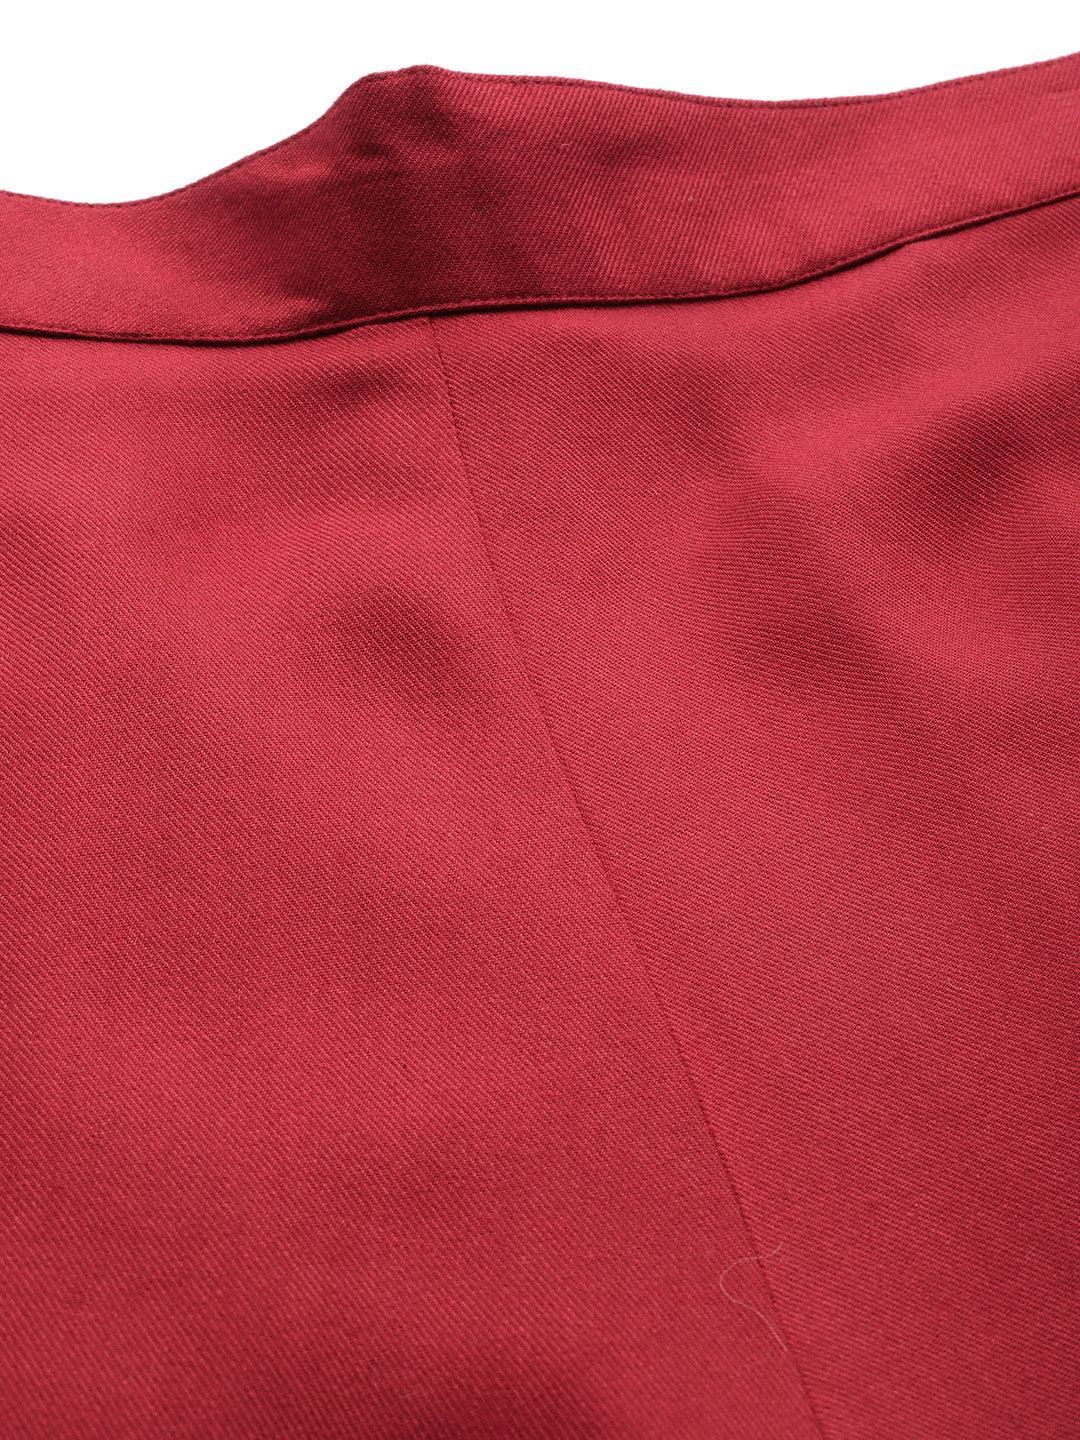 Red Solid Pashmina Wool Trousers